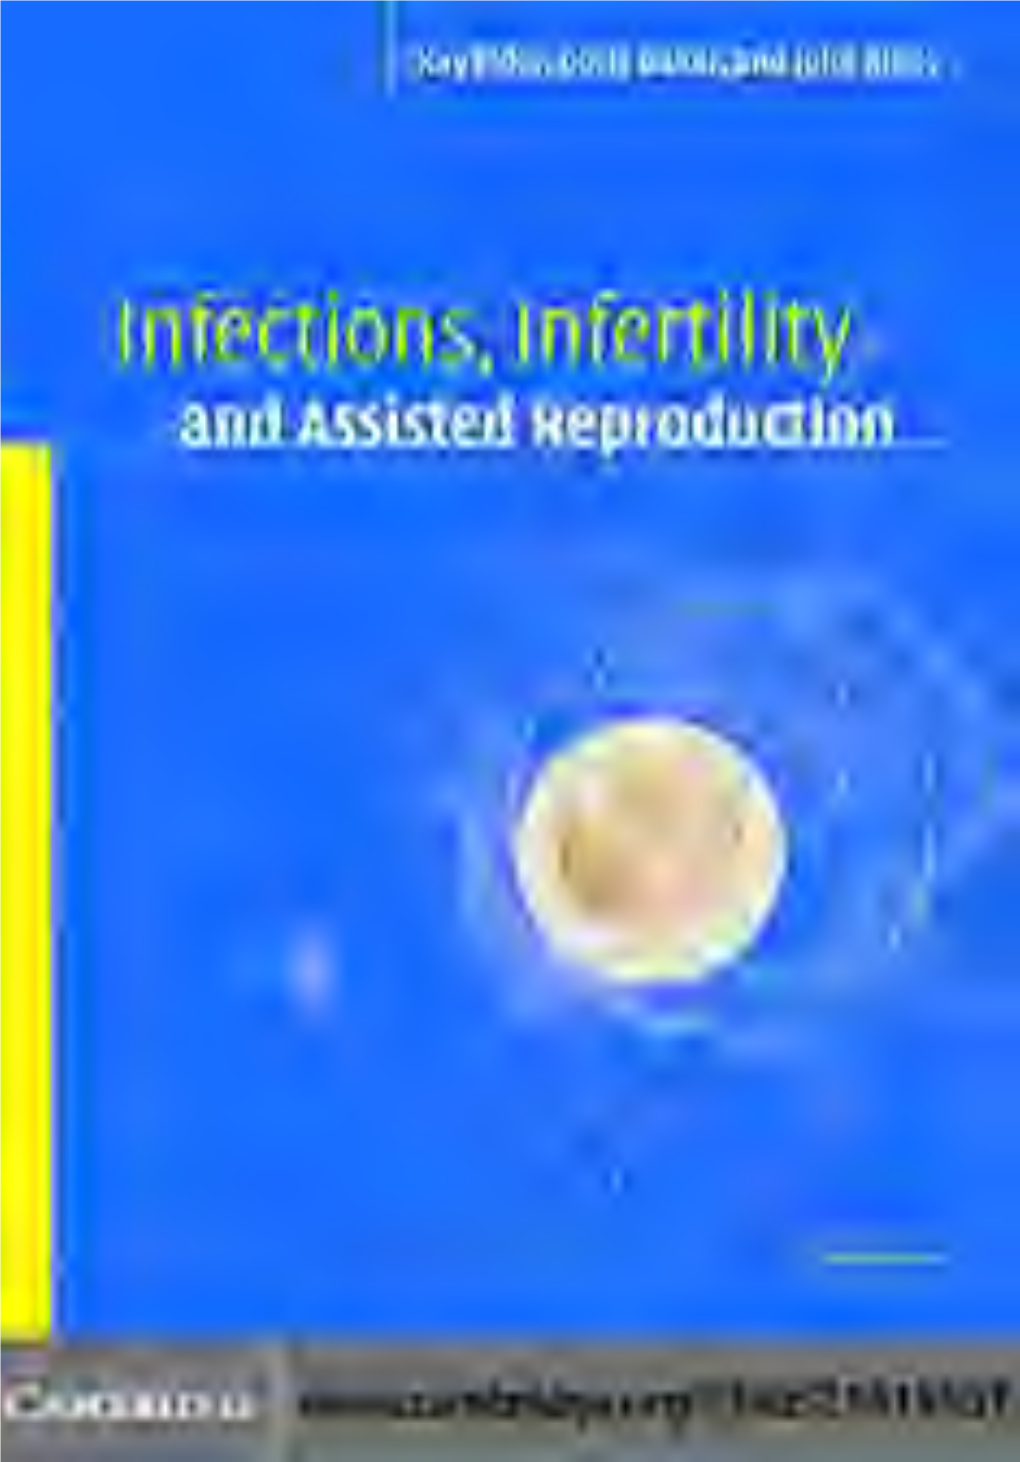 Infections, Infertility, and Assisted Reproduction